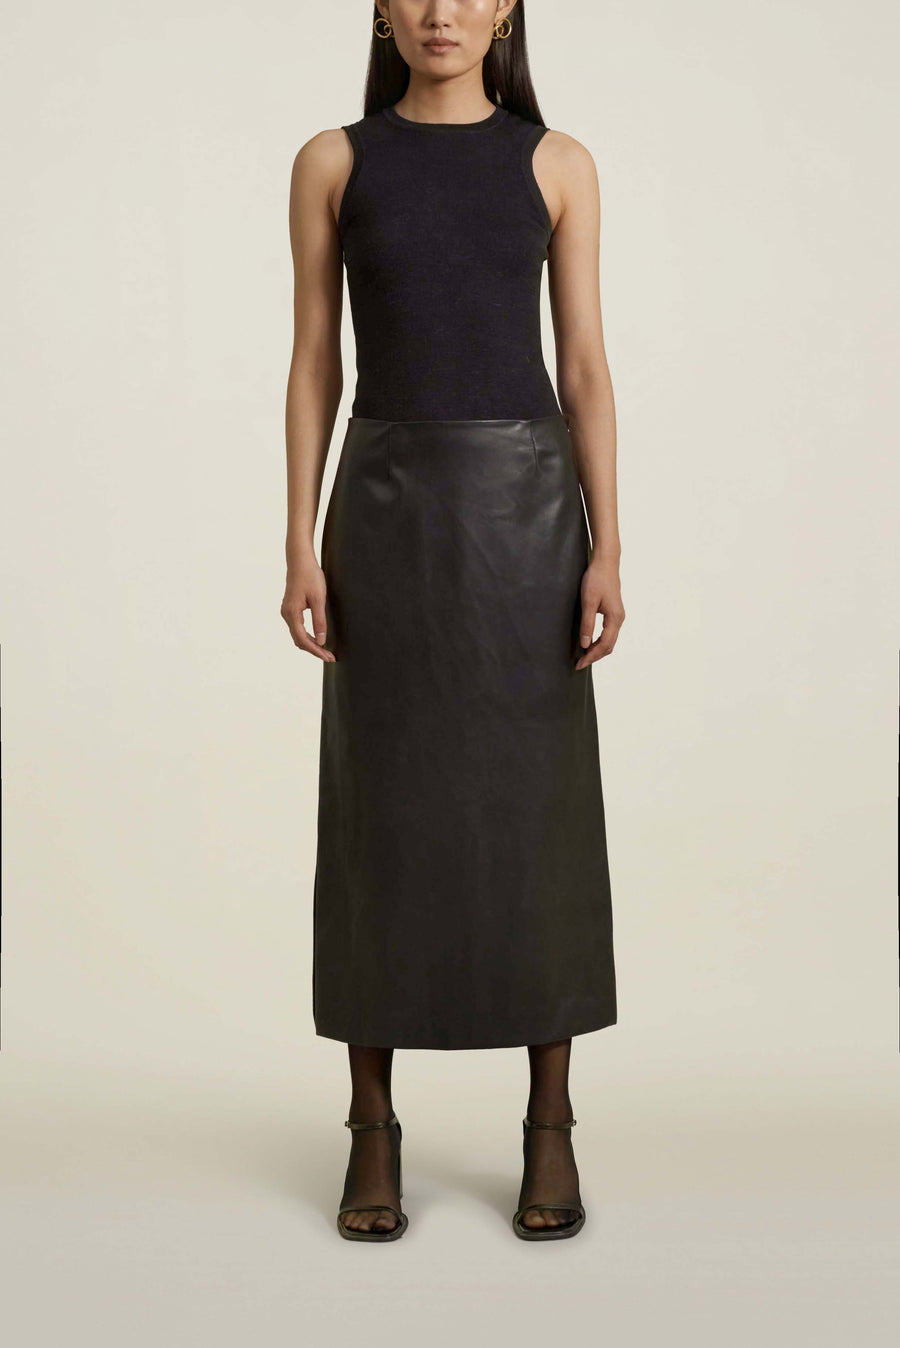 Forsyth Pencil Skirt in Black Faux Leather